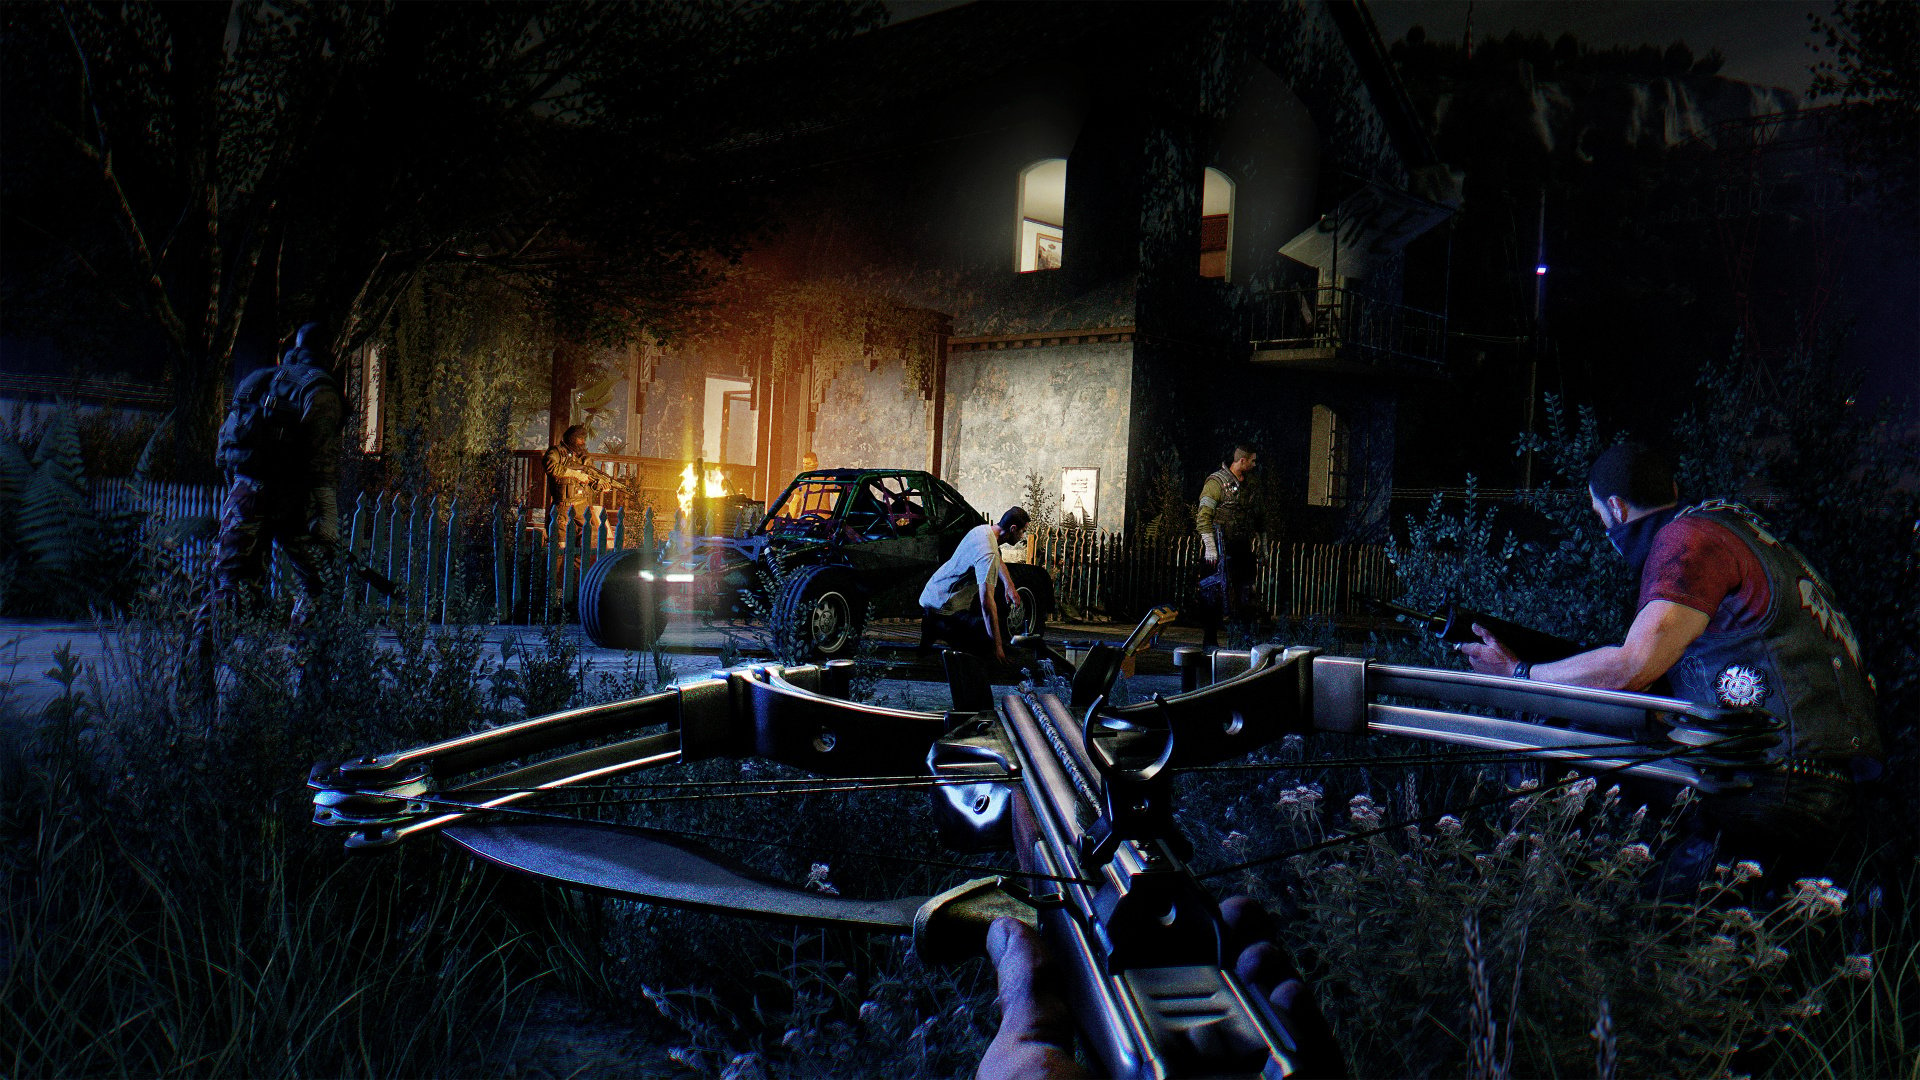 Dying Light: The Following (PS4 / PlayStation 4) Game Profile | News